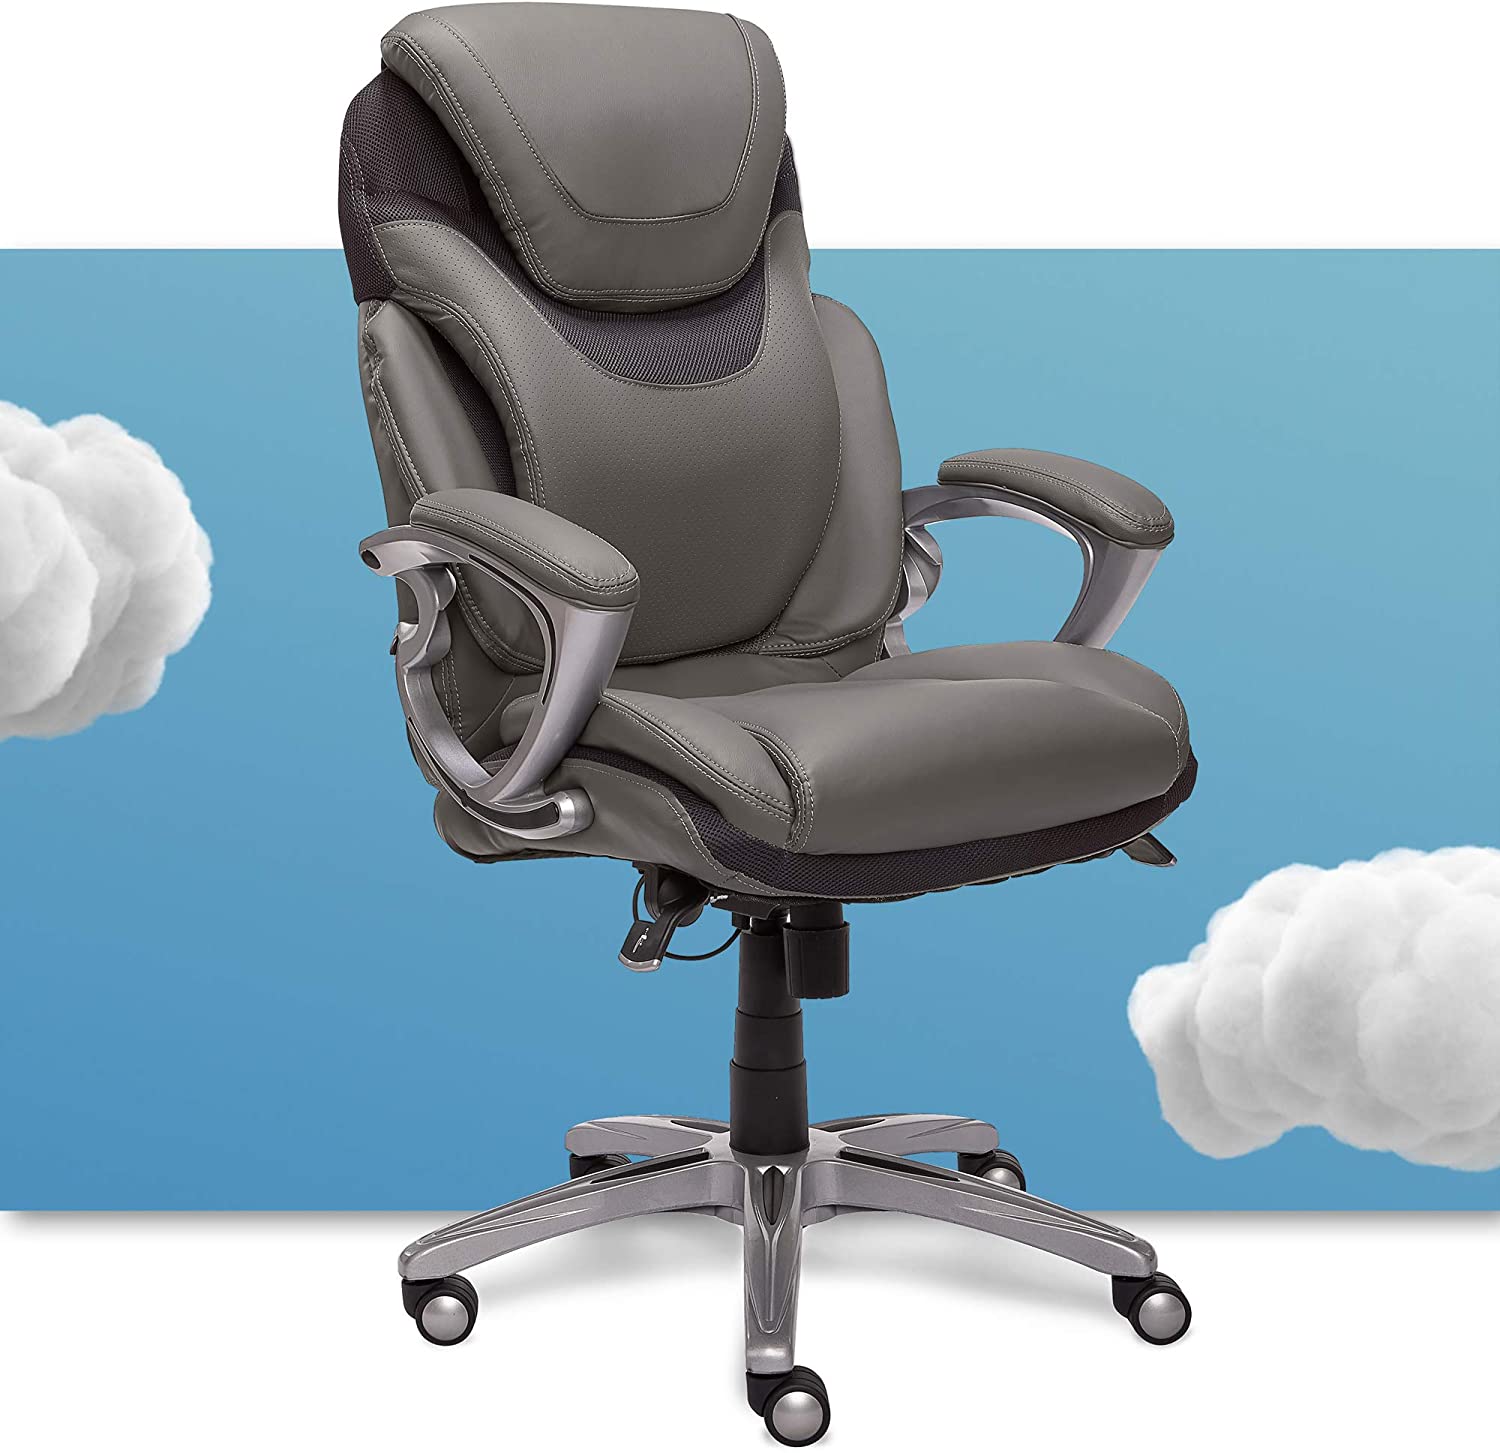 Serta Air Lumbar Manager's Office Chair Review